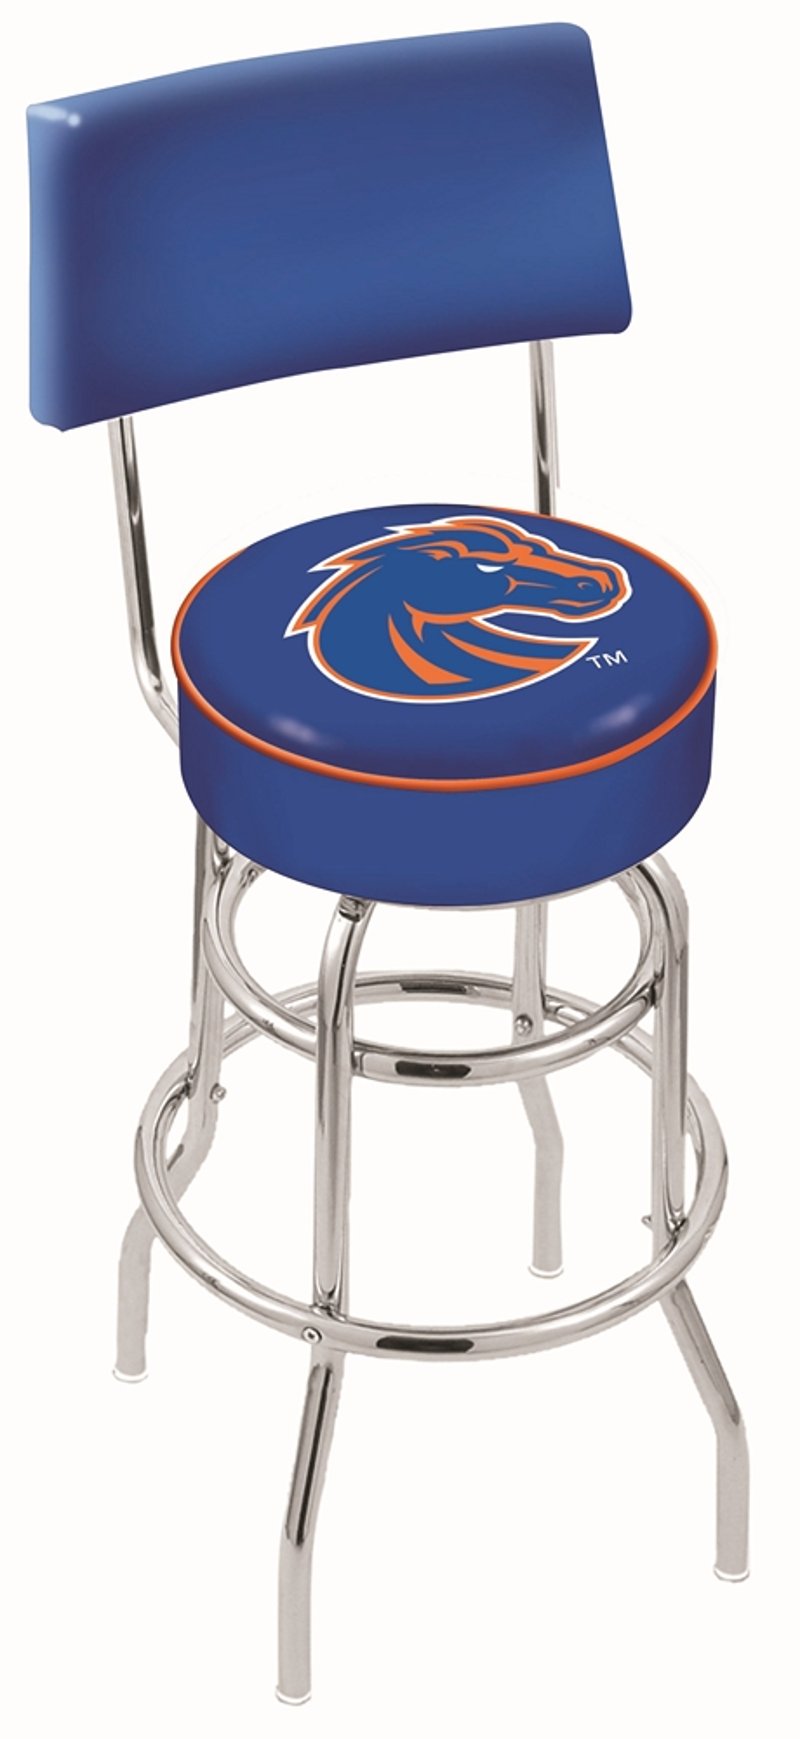 30 Inch Back Rest Bar Stool Boise State Rc Willey Furniture Store